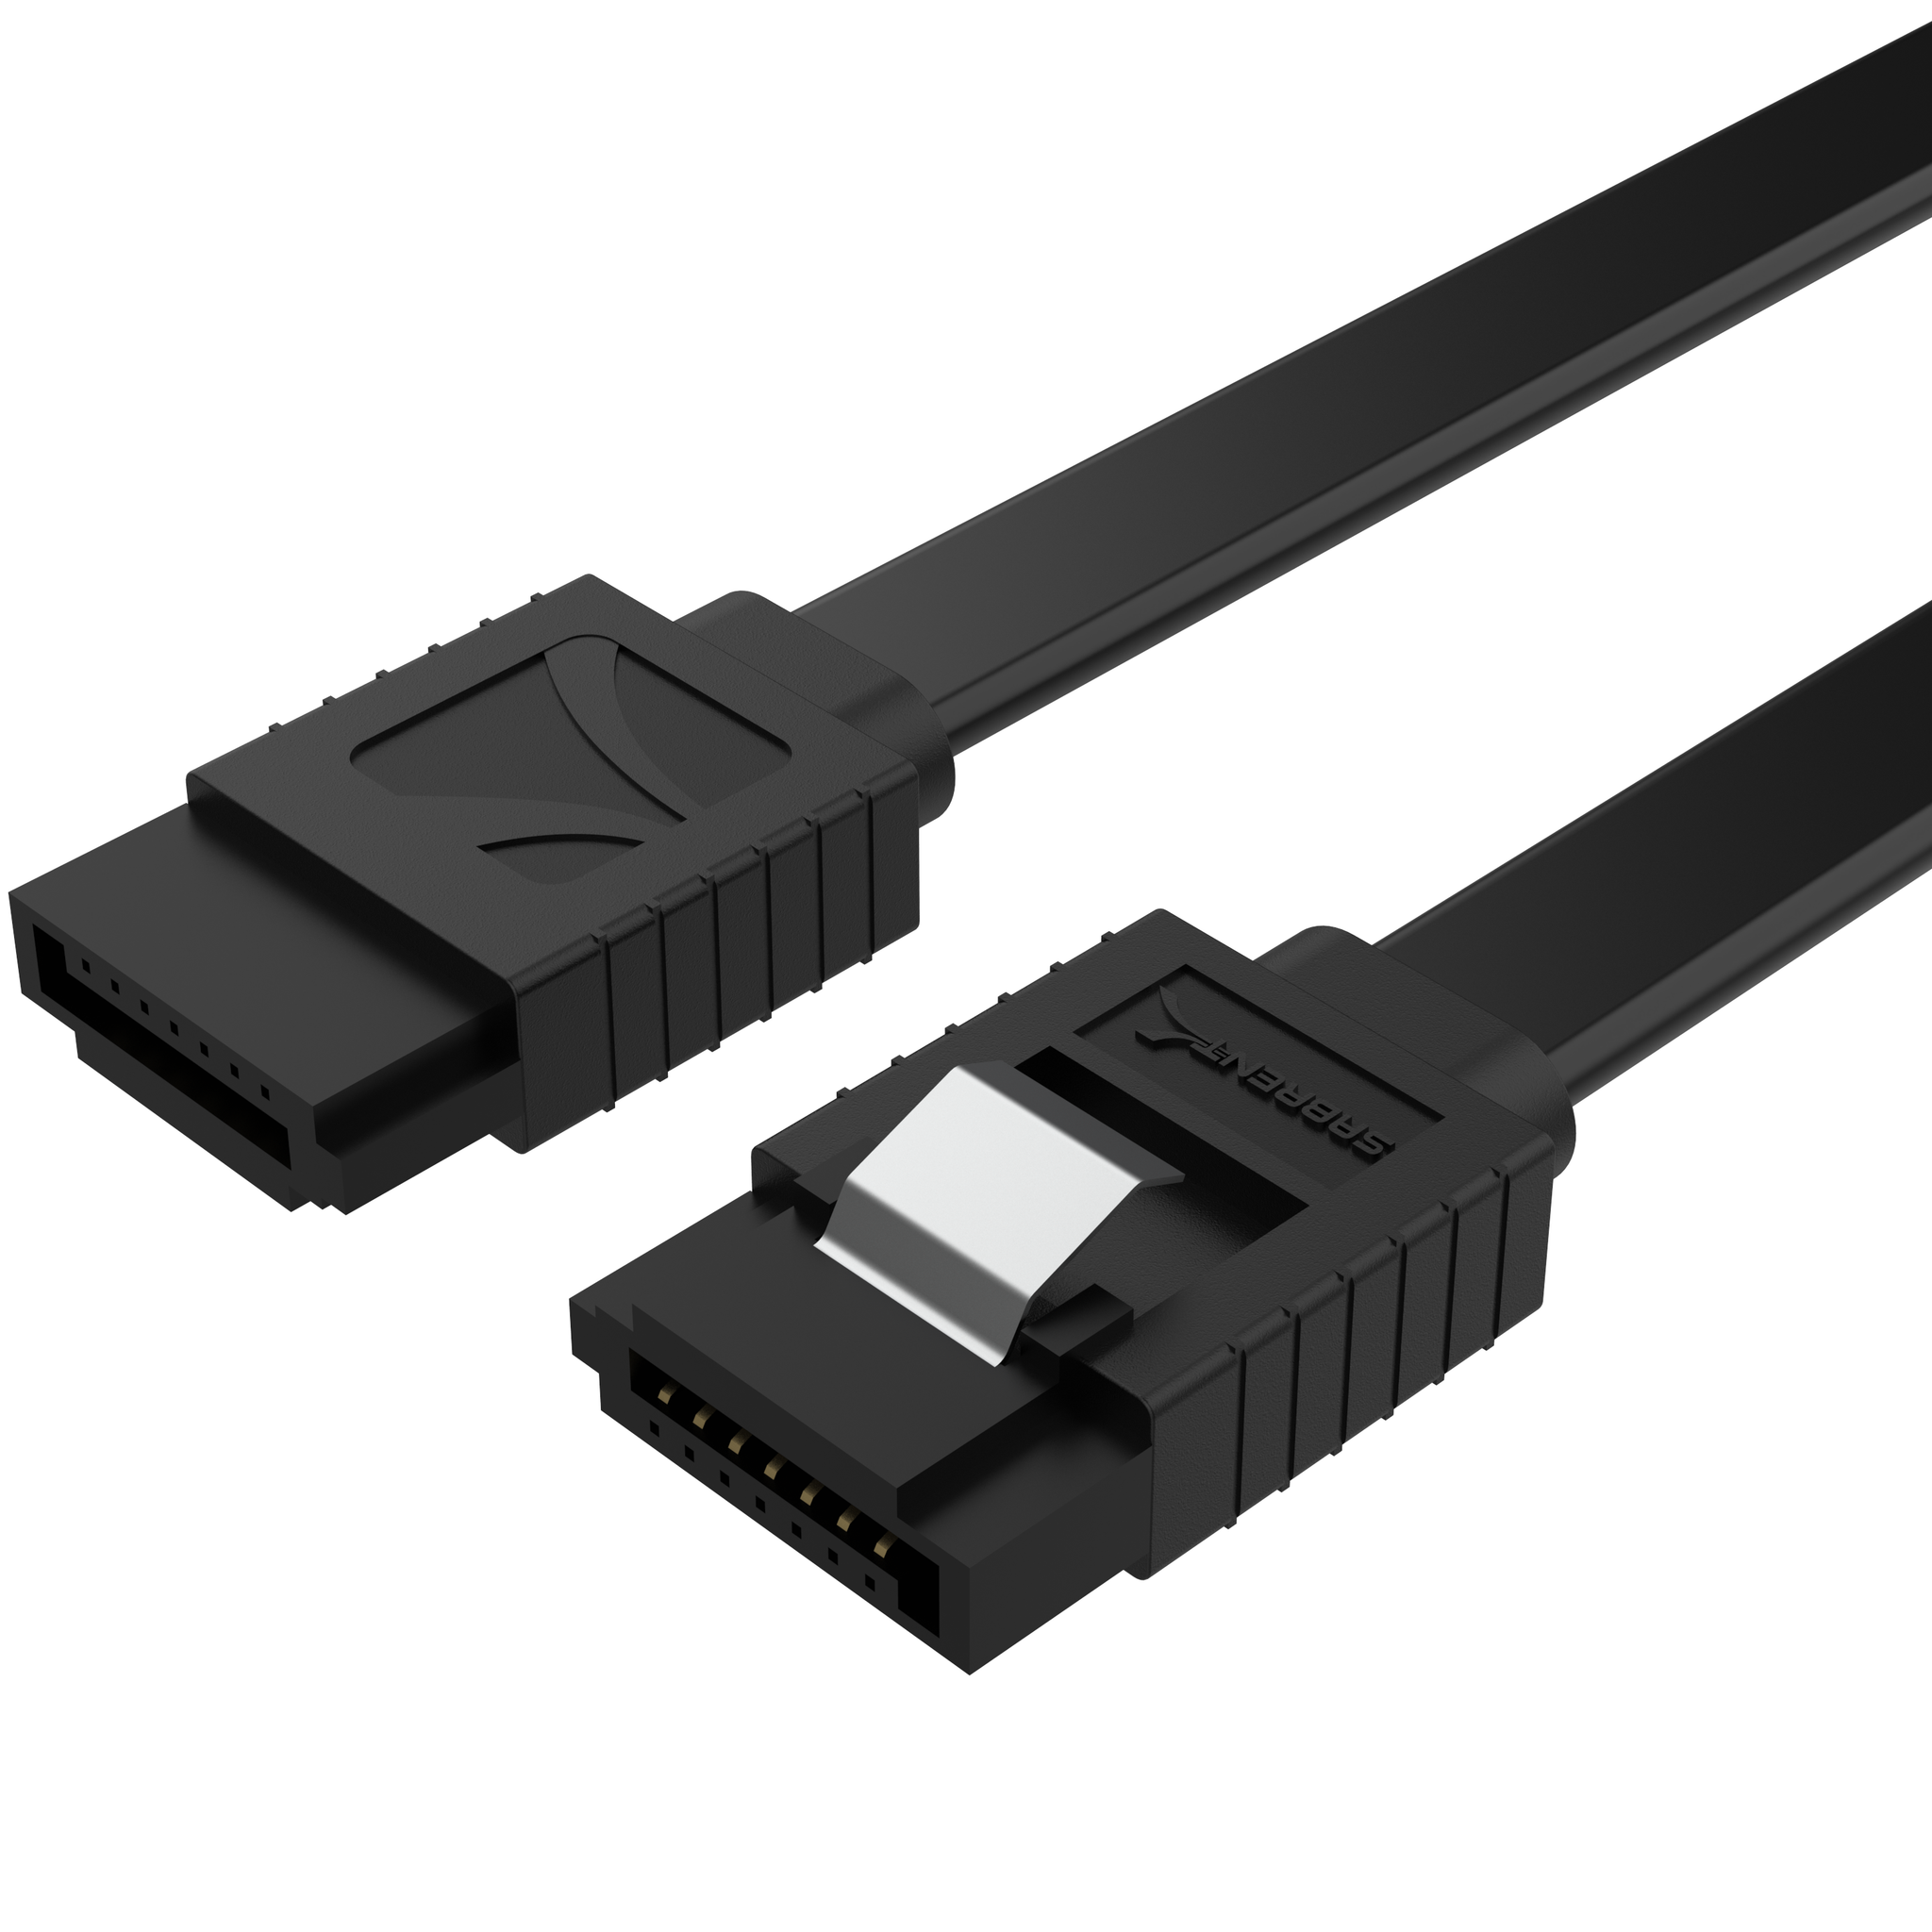 shampoo give Nebu SATA III (6 Gbit/s) Straight Data Cable with Locking Latch for HDD / S -  Sabrent